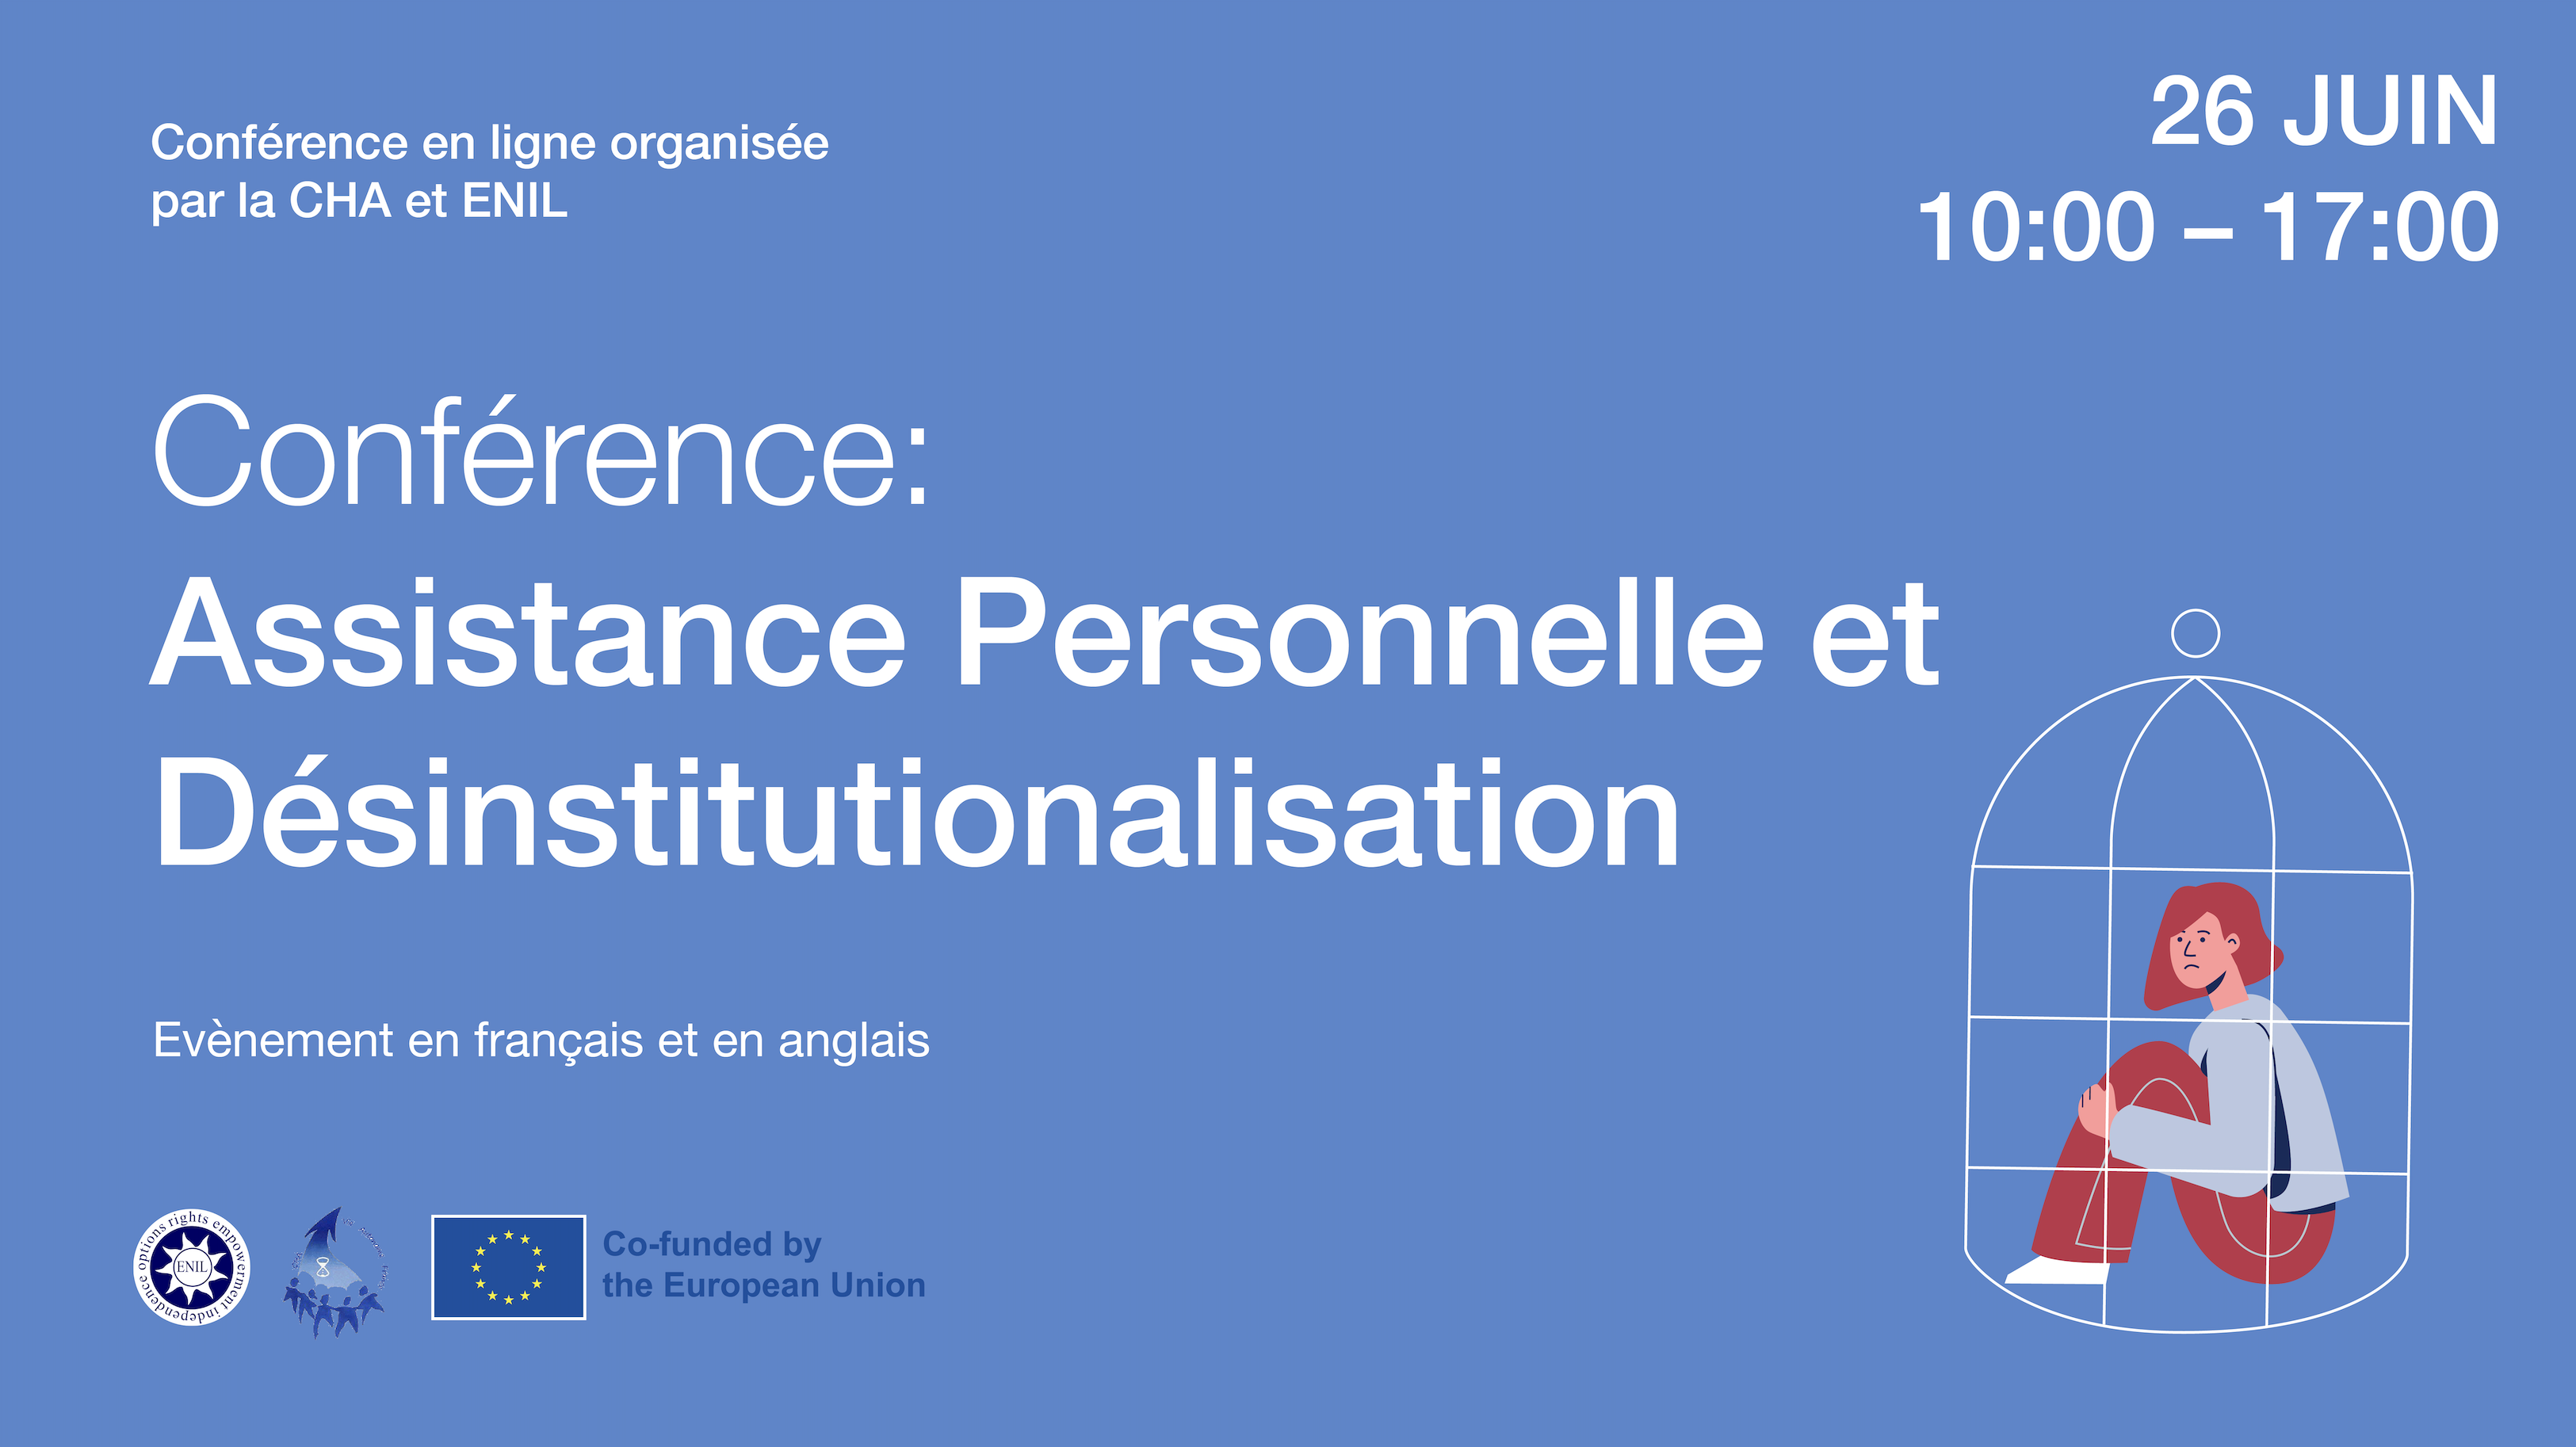 Conference: Personal Assistance and Deinstitutionalization. Event in both French and English, on June 26, from 10:00 to 17:00. Online conference organized by CHA and ENIL.